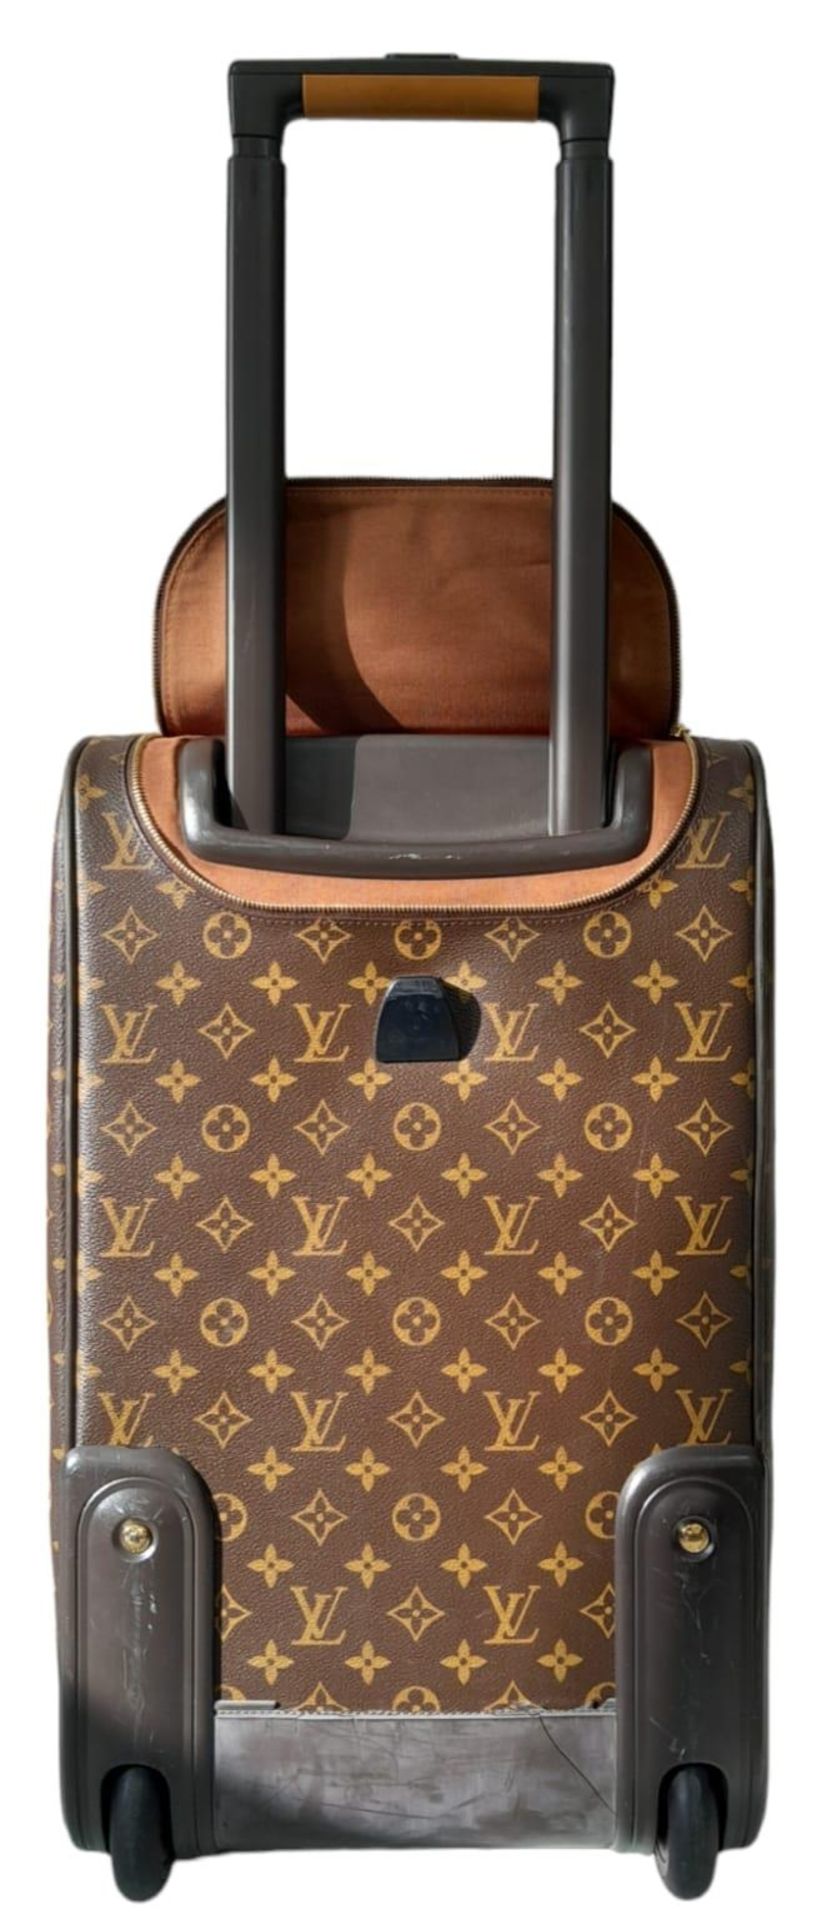 A Louis Vuitton Monogram Eole Convertible Travel Bag. Leather exterior with gold-toned hardware, - Image 7 of 11